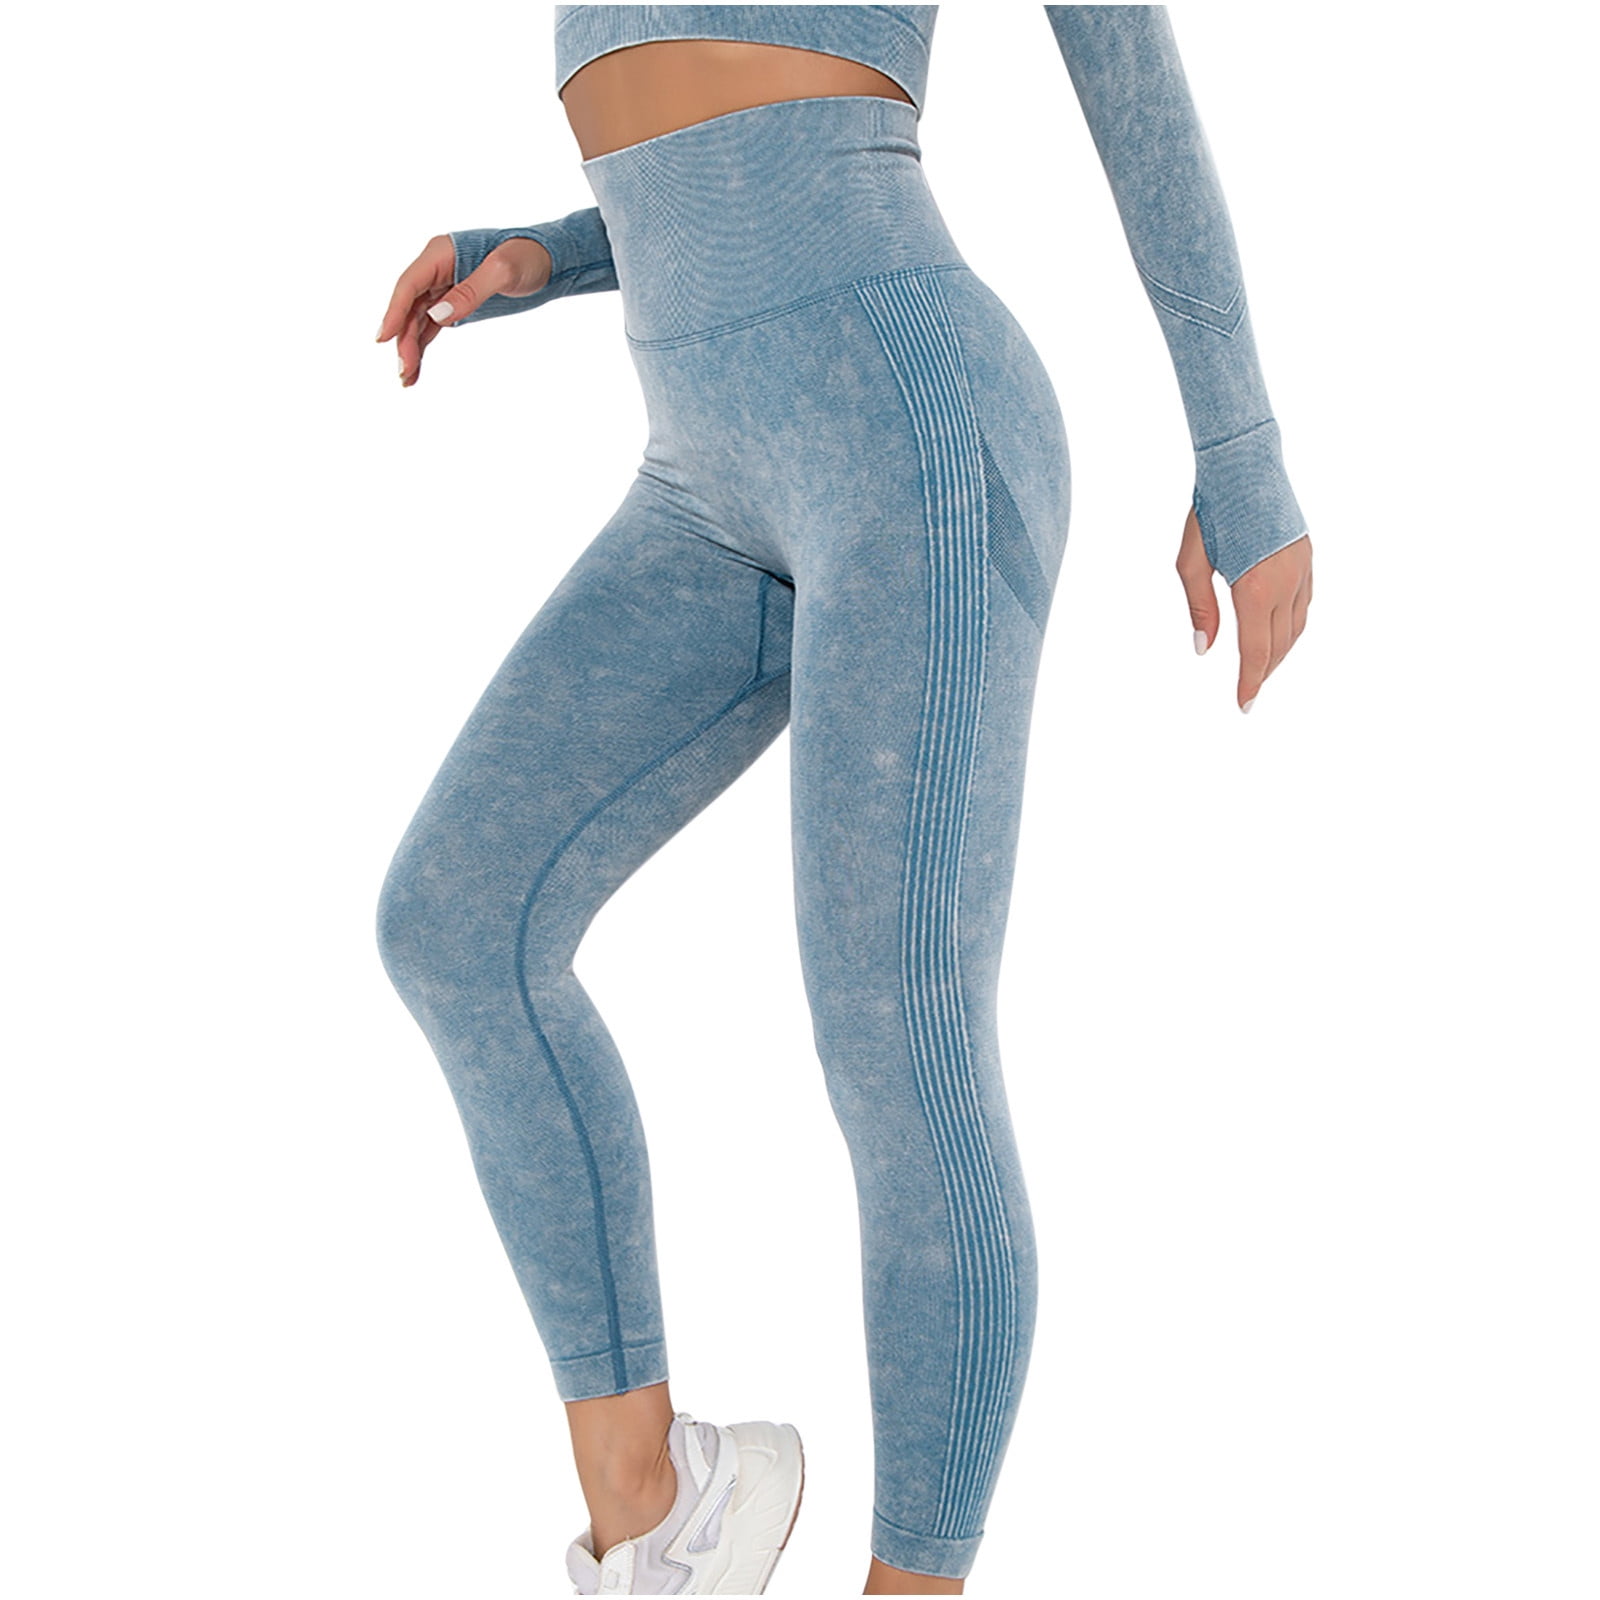 YWDJ Leggings for Women High Waist Plus Size European And American Seamless  Water Wash Knit Hygroscopic Sexy Hip Lifting Hip Sweating Yoga Pants Sports  Fitness Pants TightsGrayL 